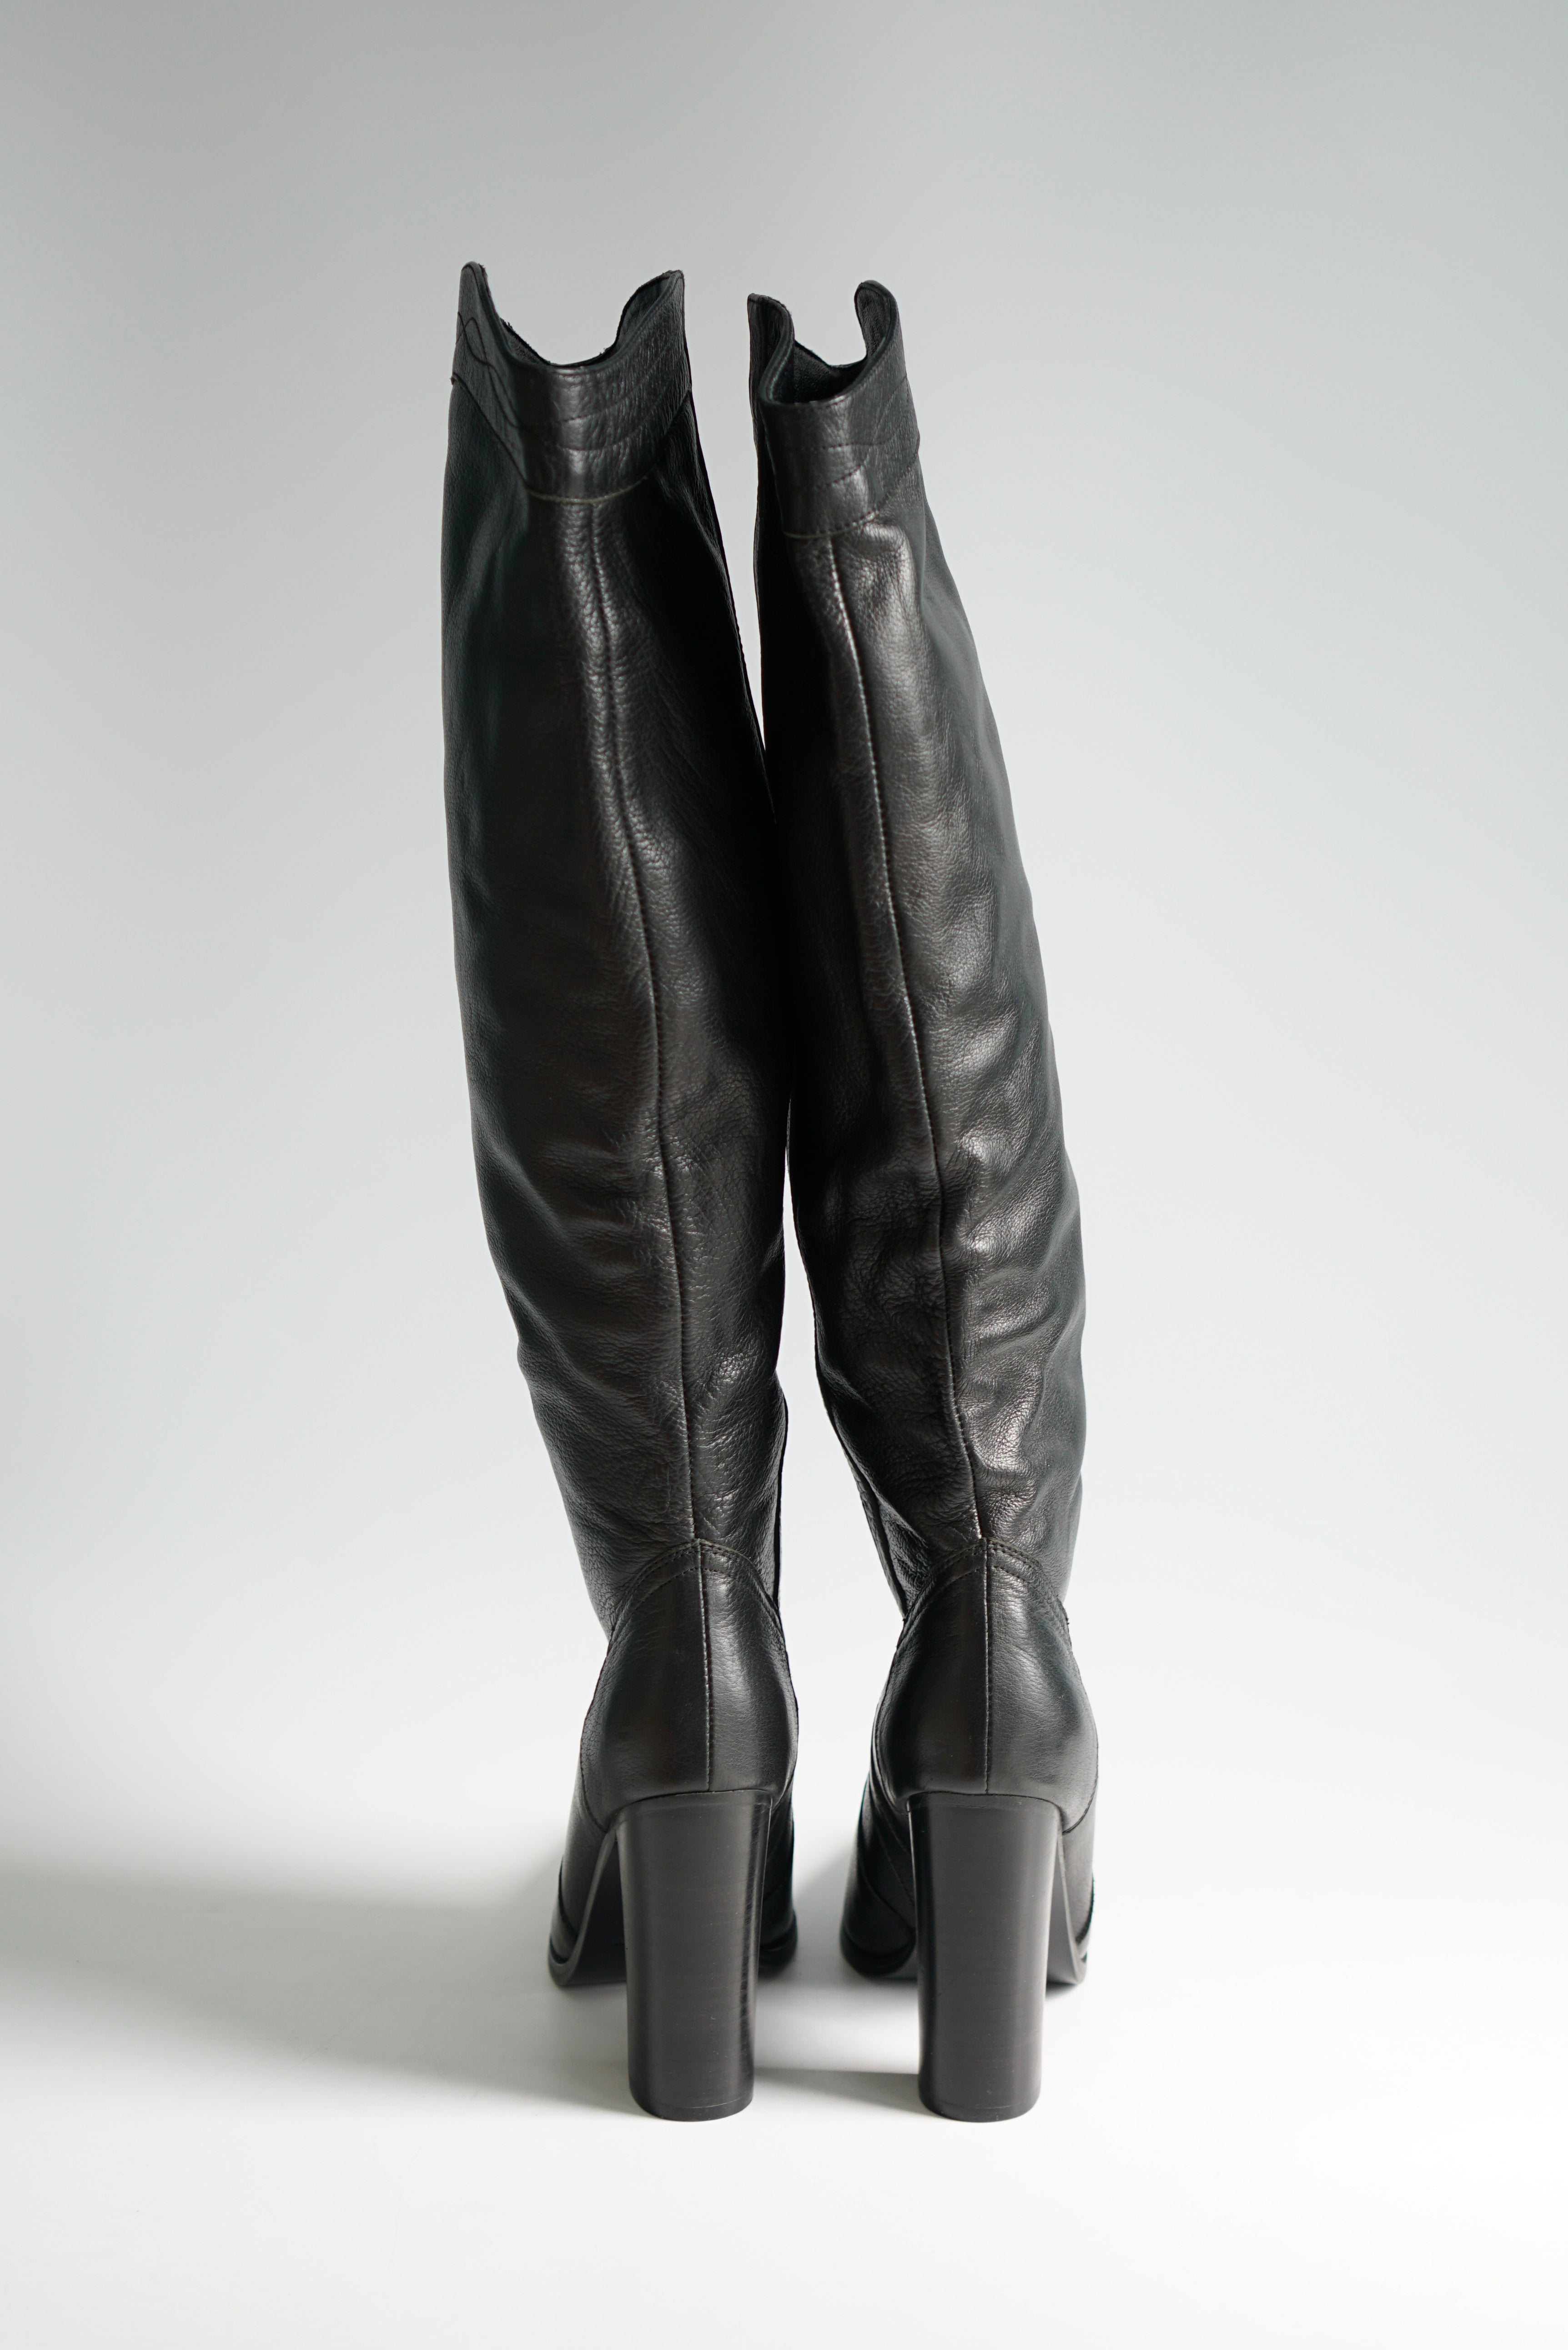 YSL Black Leather Knee-Length Boots with Heels Size 38 EUR | Purse Maison Luxury Bags Shop